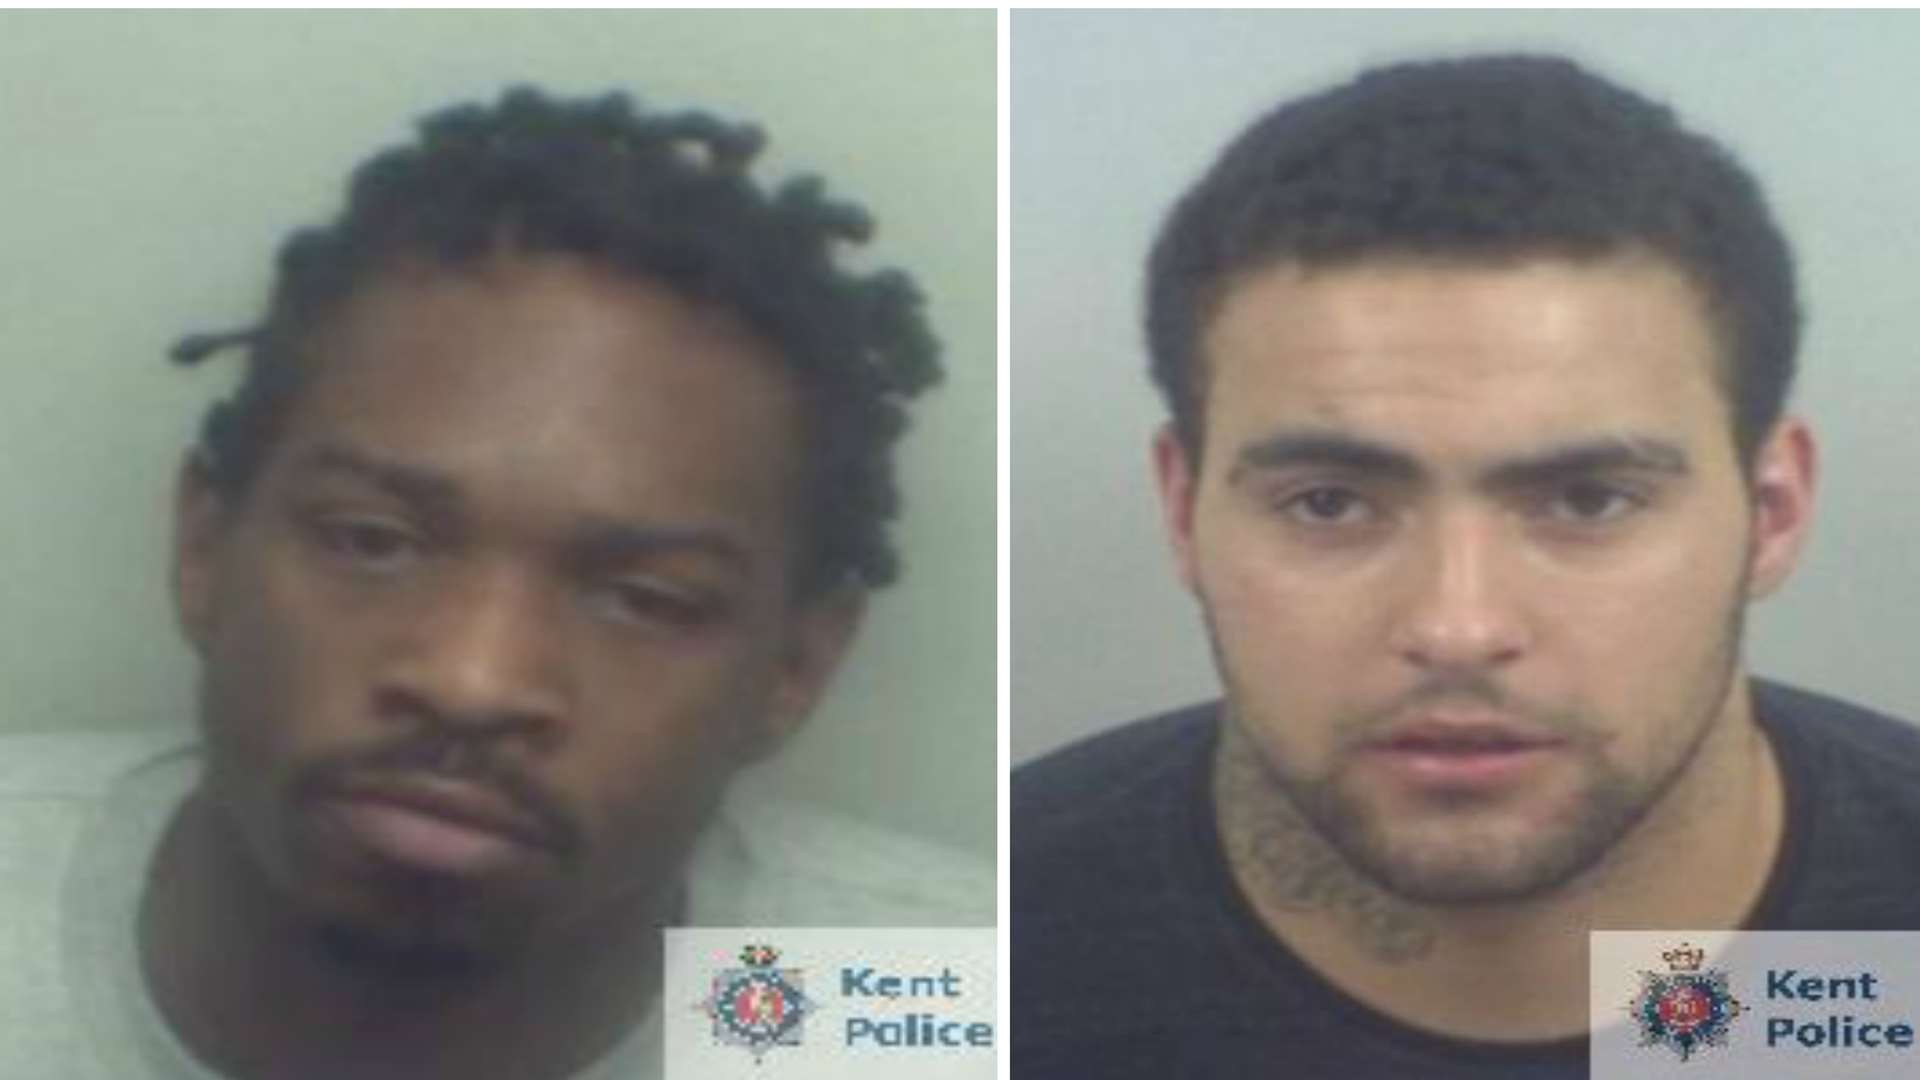 Leo Skerritt-Copeland, 23, of Melville Court, Chatham (left) and Ricky Uden, 22, of Albany Road, Chatham (right). Picture: Kent Police